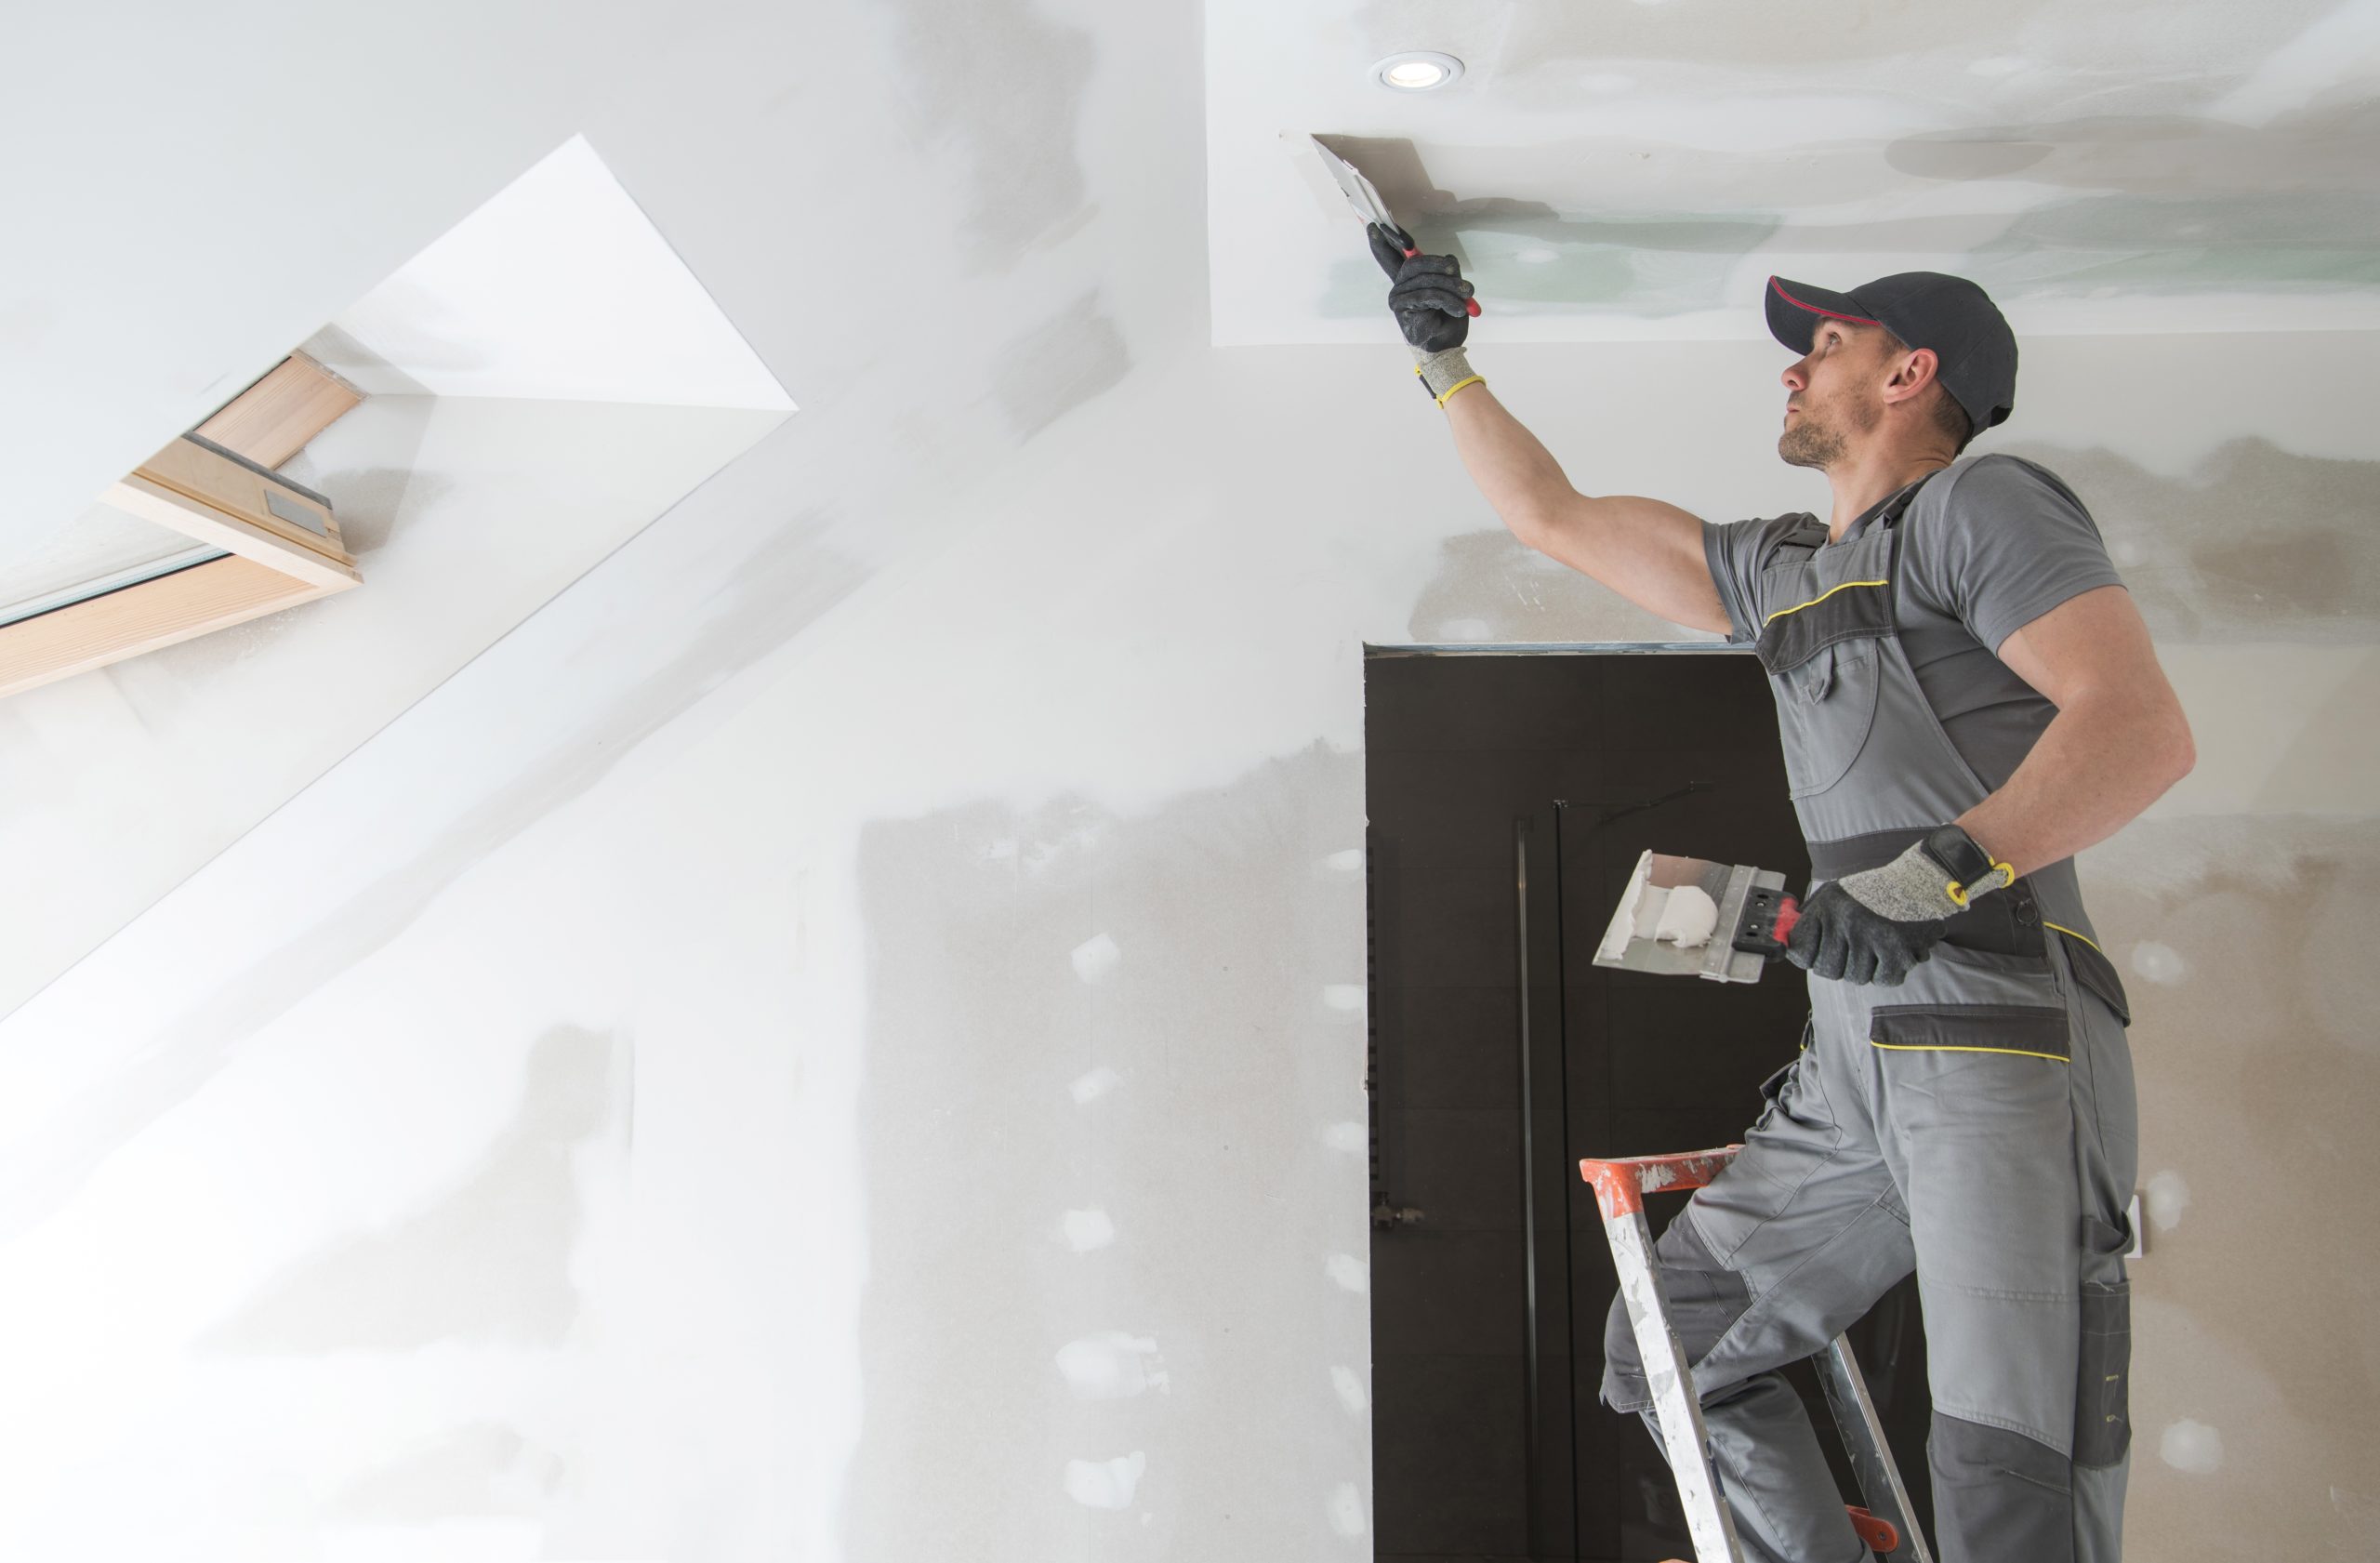 How Long Does It Take To Patch Drywall?